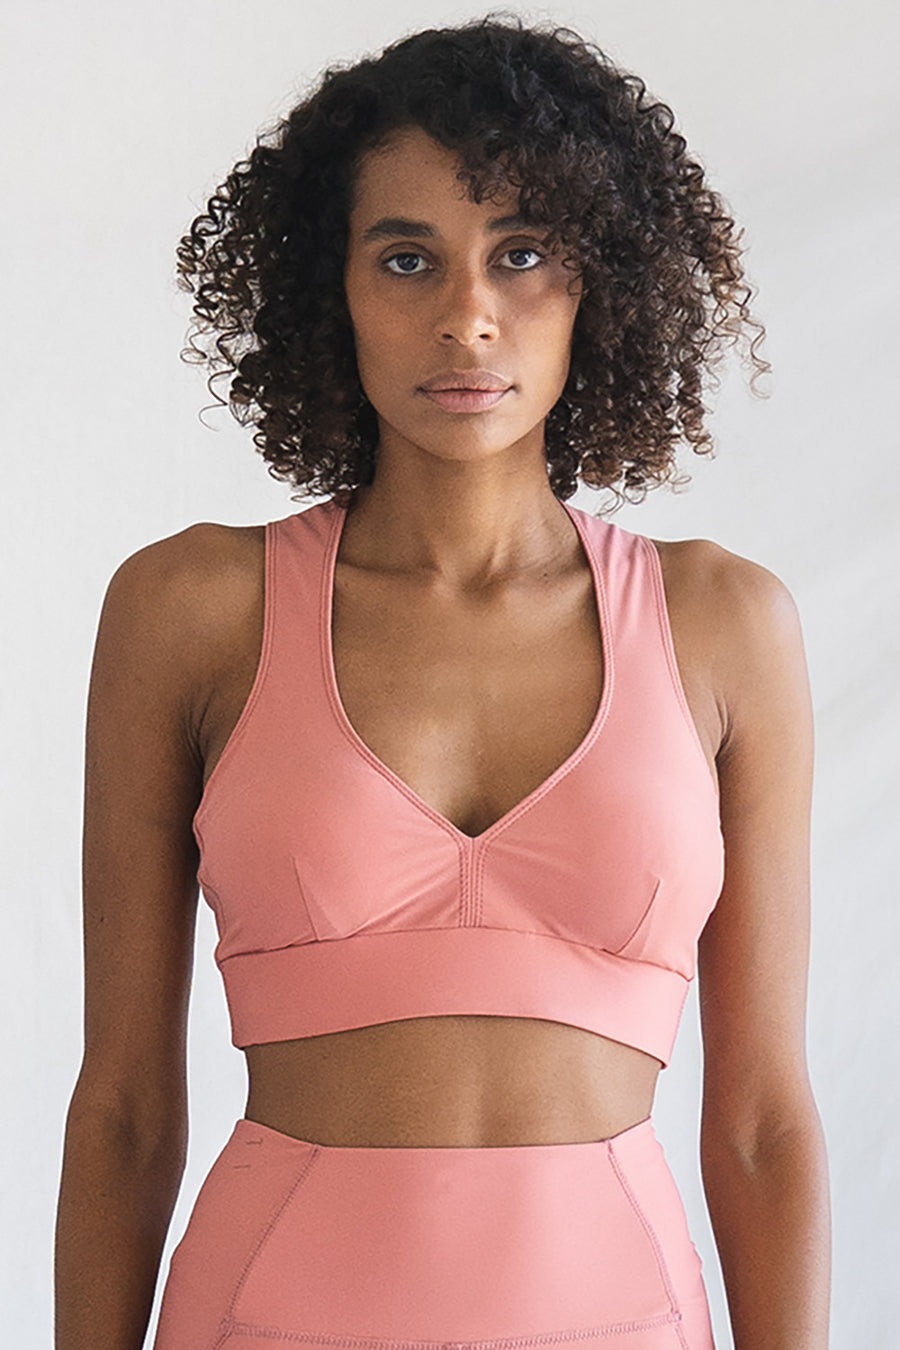 LSKD - Pretty in Pink ✨💞 Agile Sports Bra // Everyday support